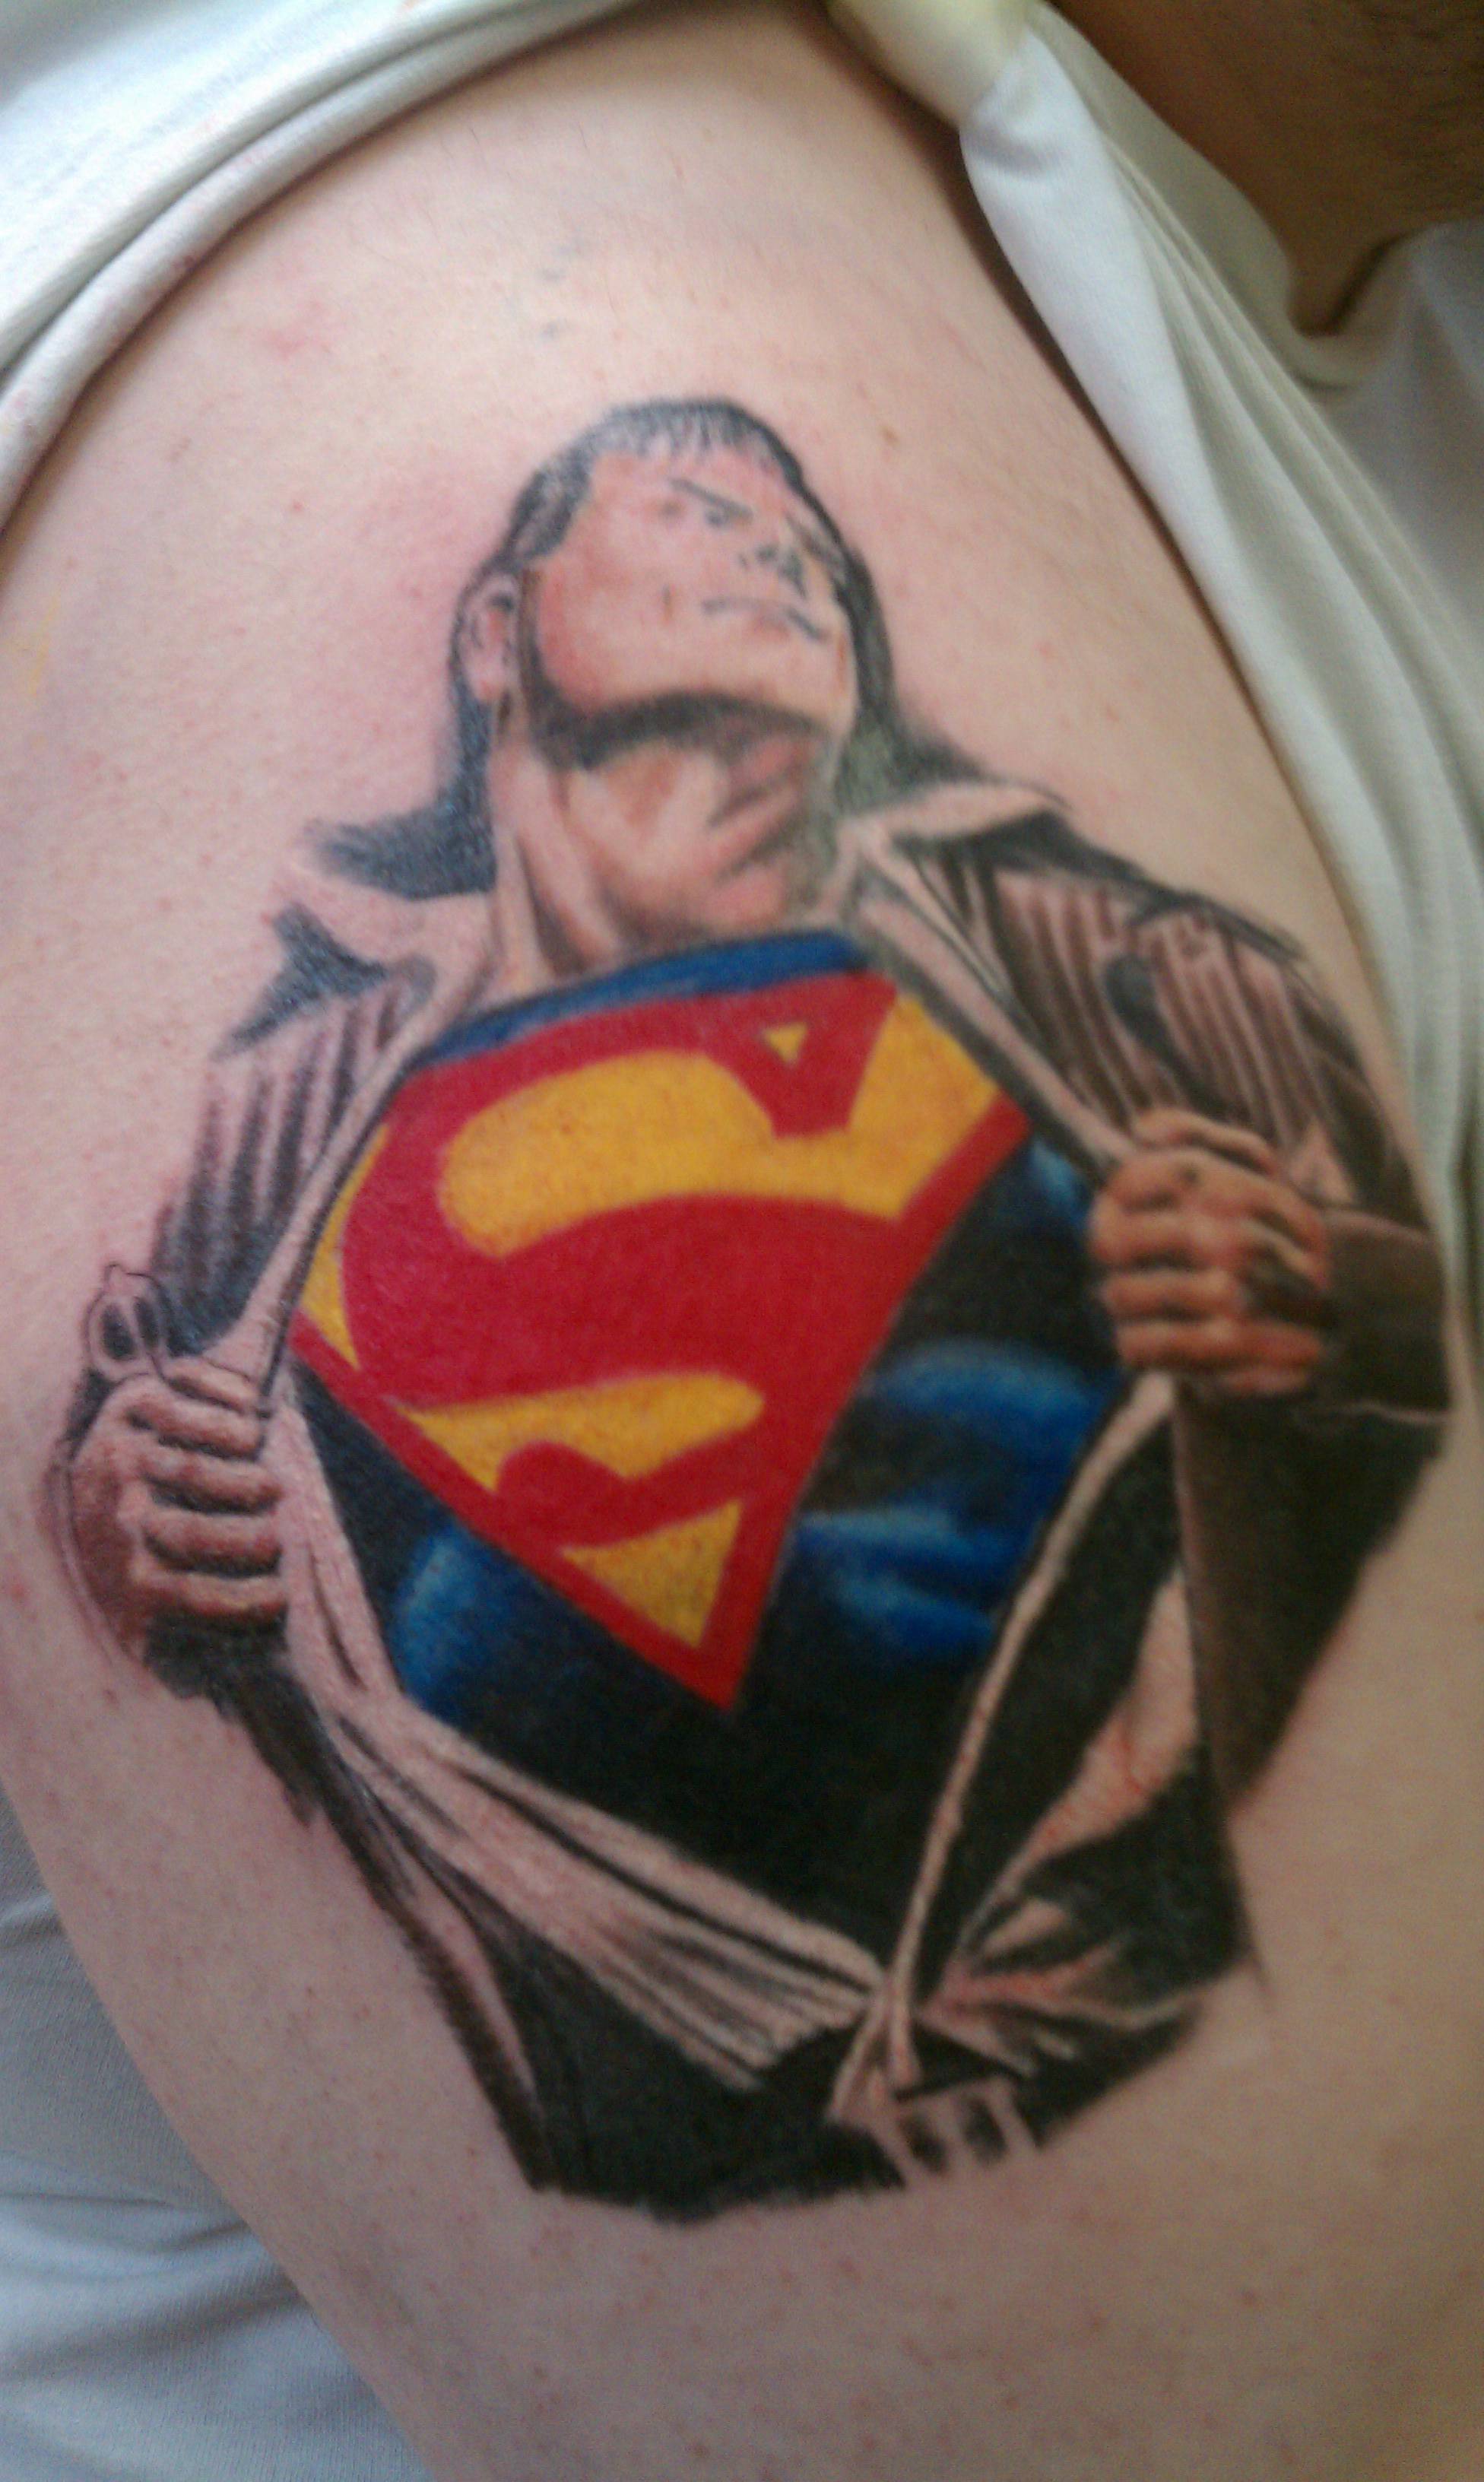 Superman Tattoos Designs, Ideas and Meaning | Tattoos For You